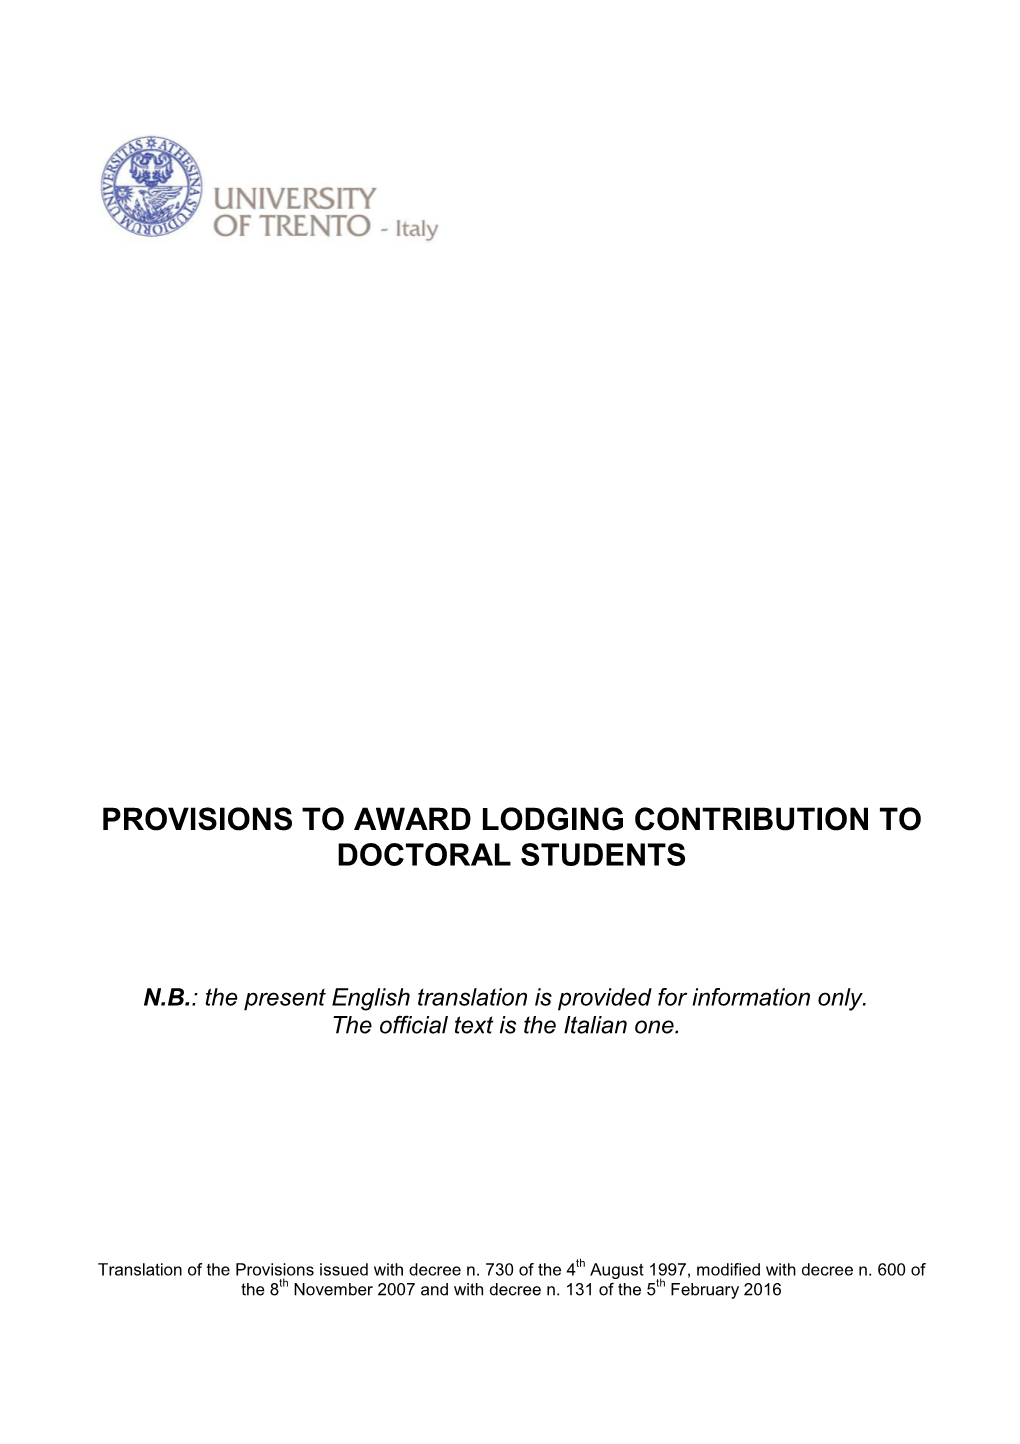 Provisions to Award Lodging Contribution to Doctoral Students